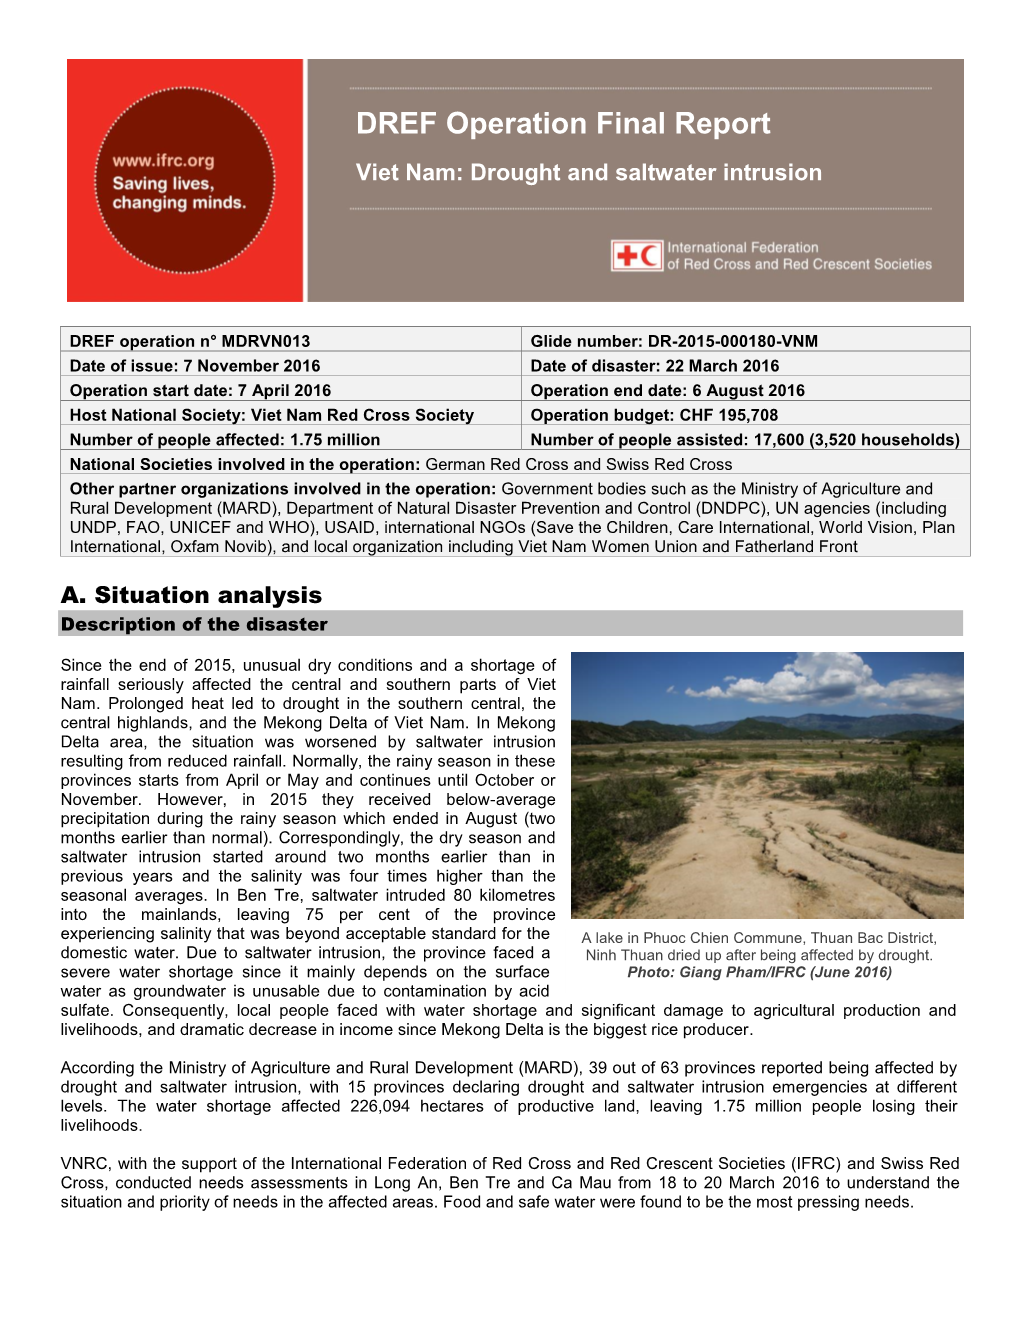 DREF Operation Final Report Viet Nam: Drought and Saltwater Intrusion